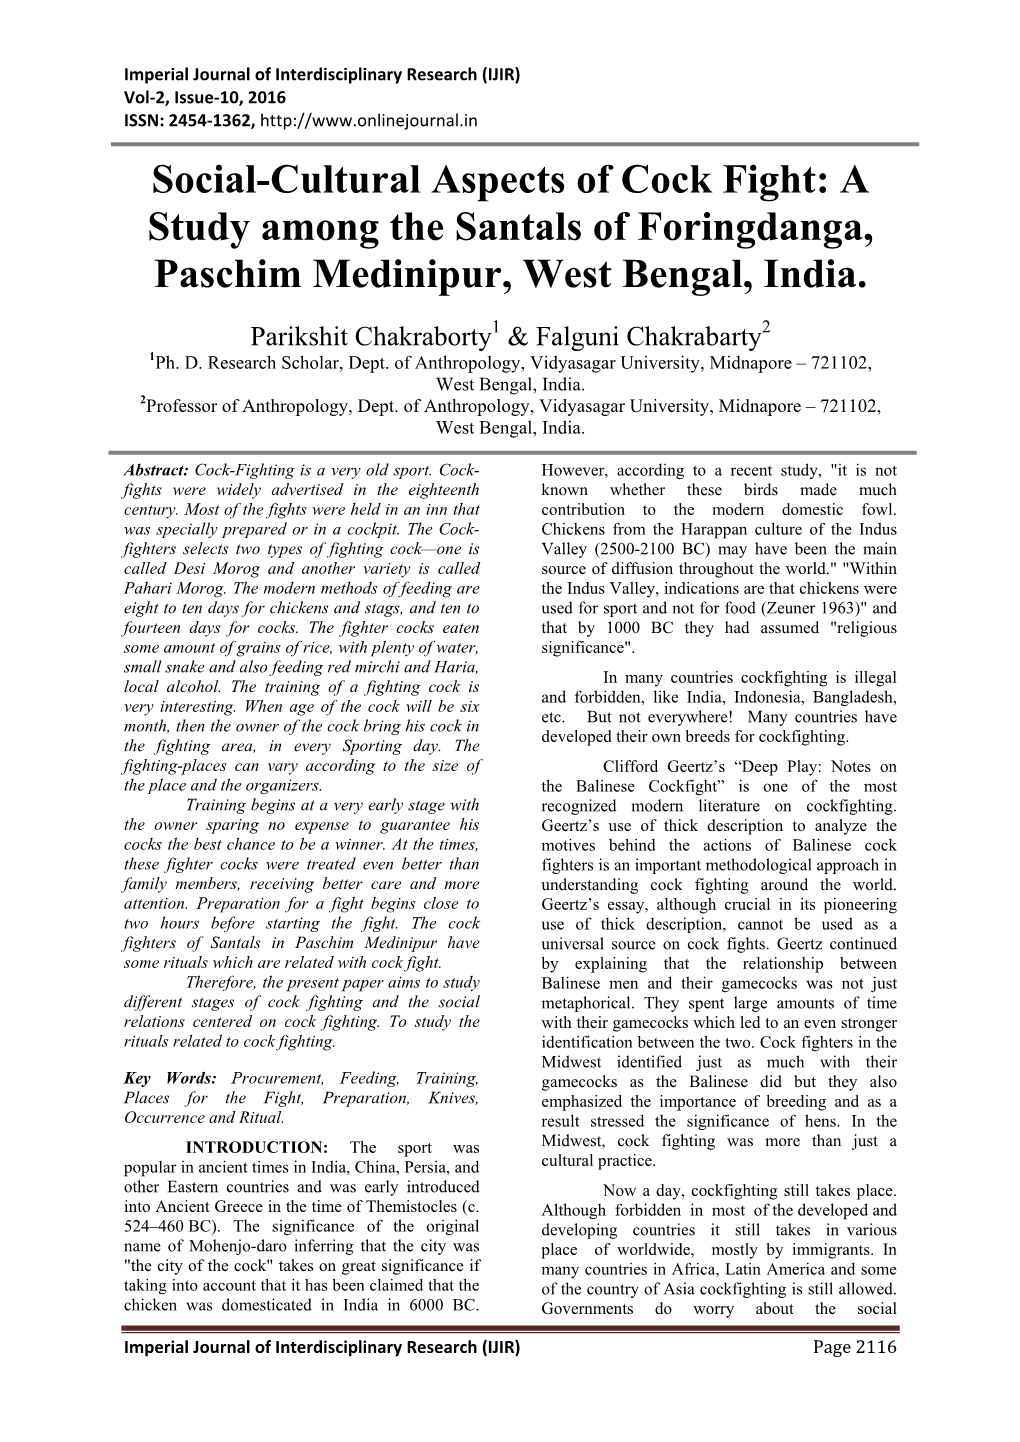 Social-Cultural Aspects of Cock Fight: a Study Among the Santals of Foringdanga, Paschim Medinipur, West Bengal, India